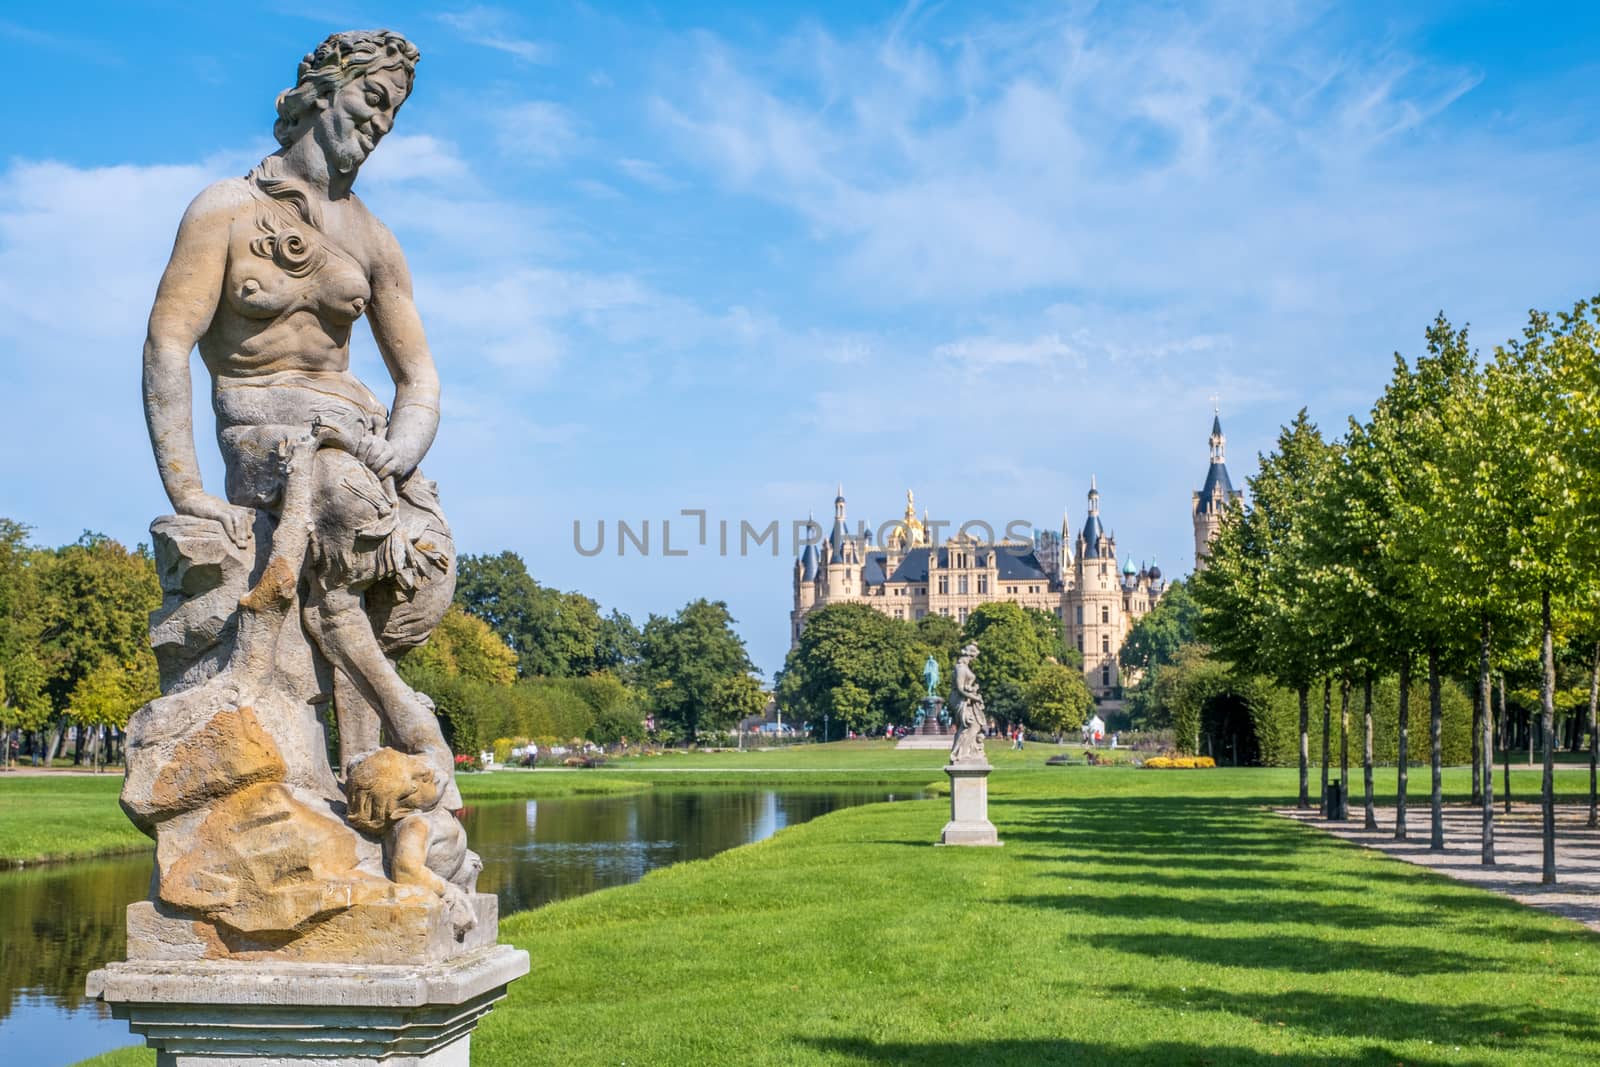 Alley of trees and statues in the Schwerin park by Fischeron